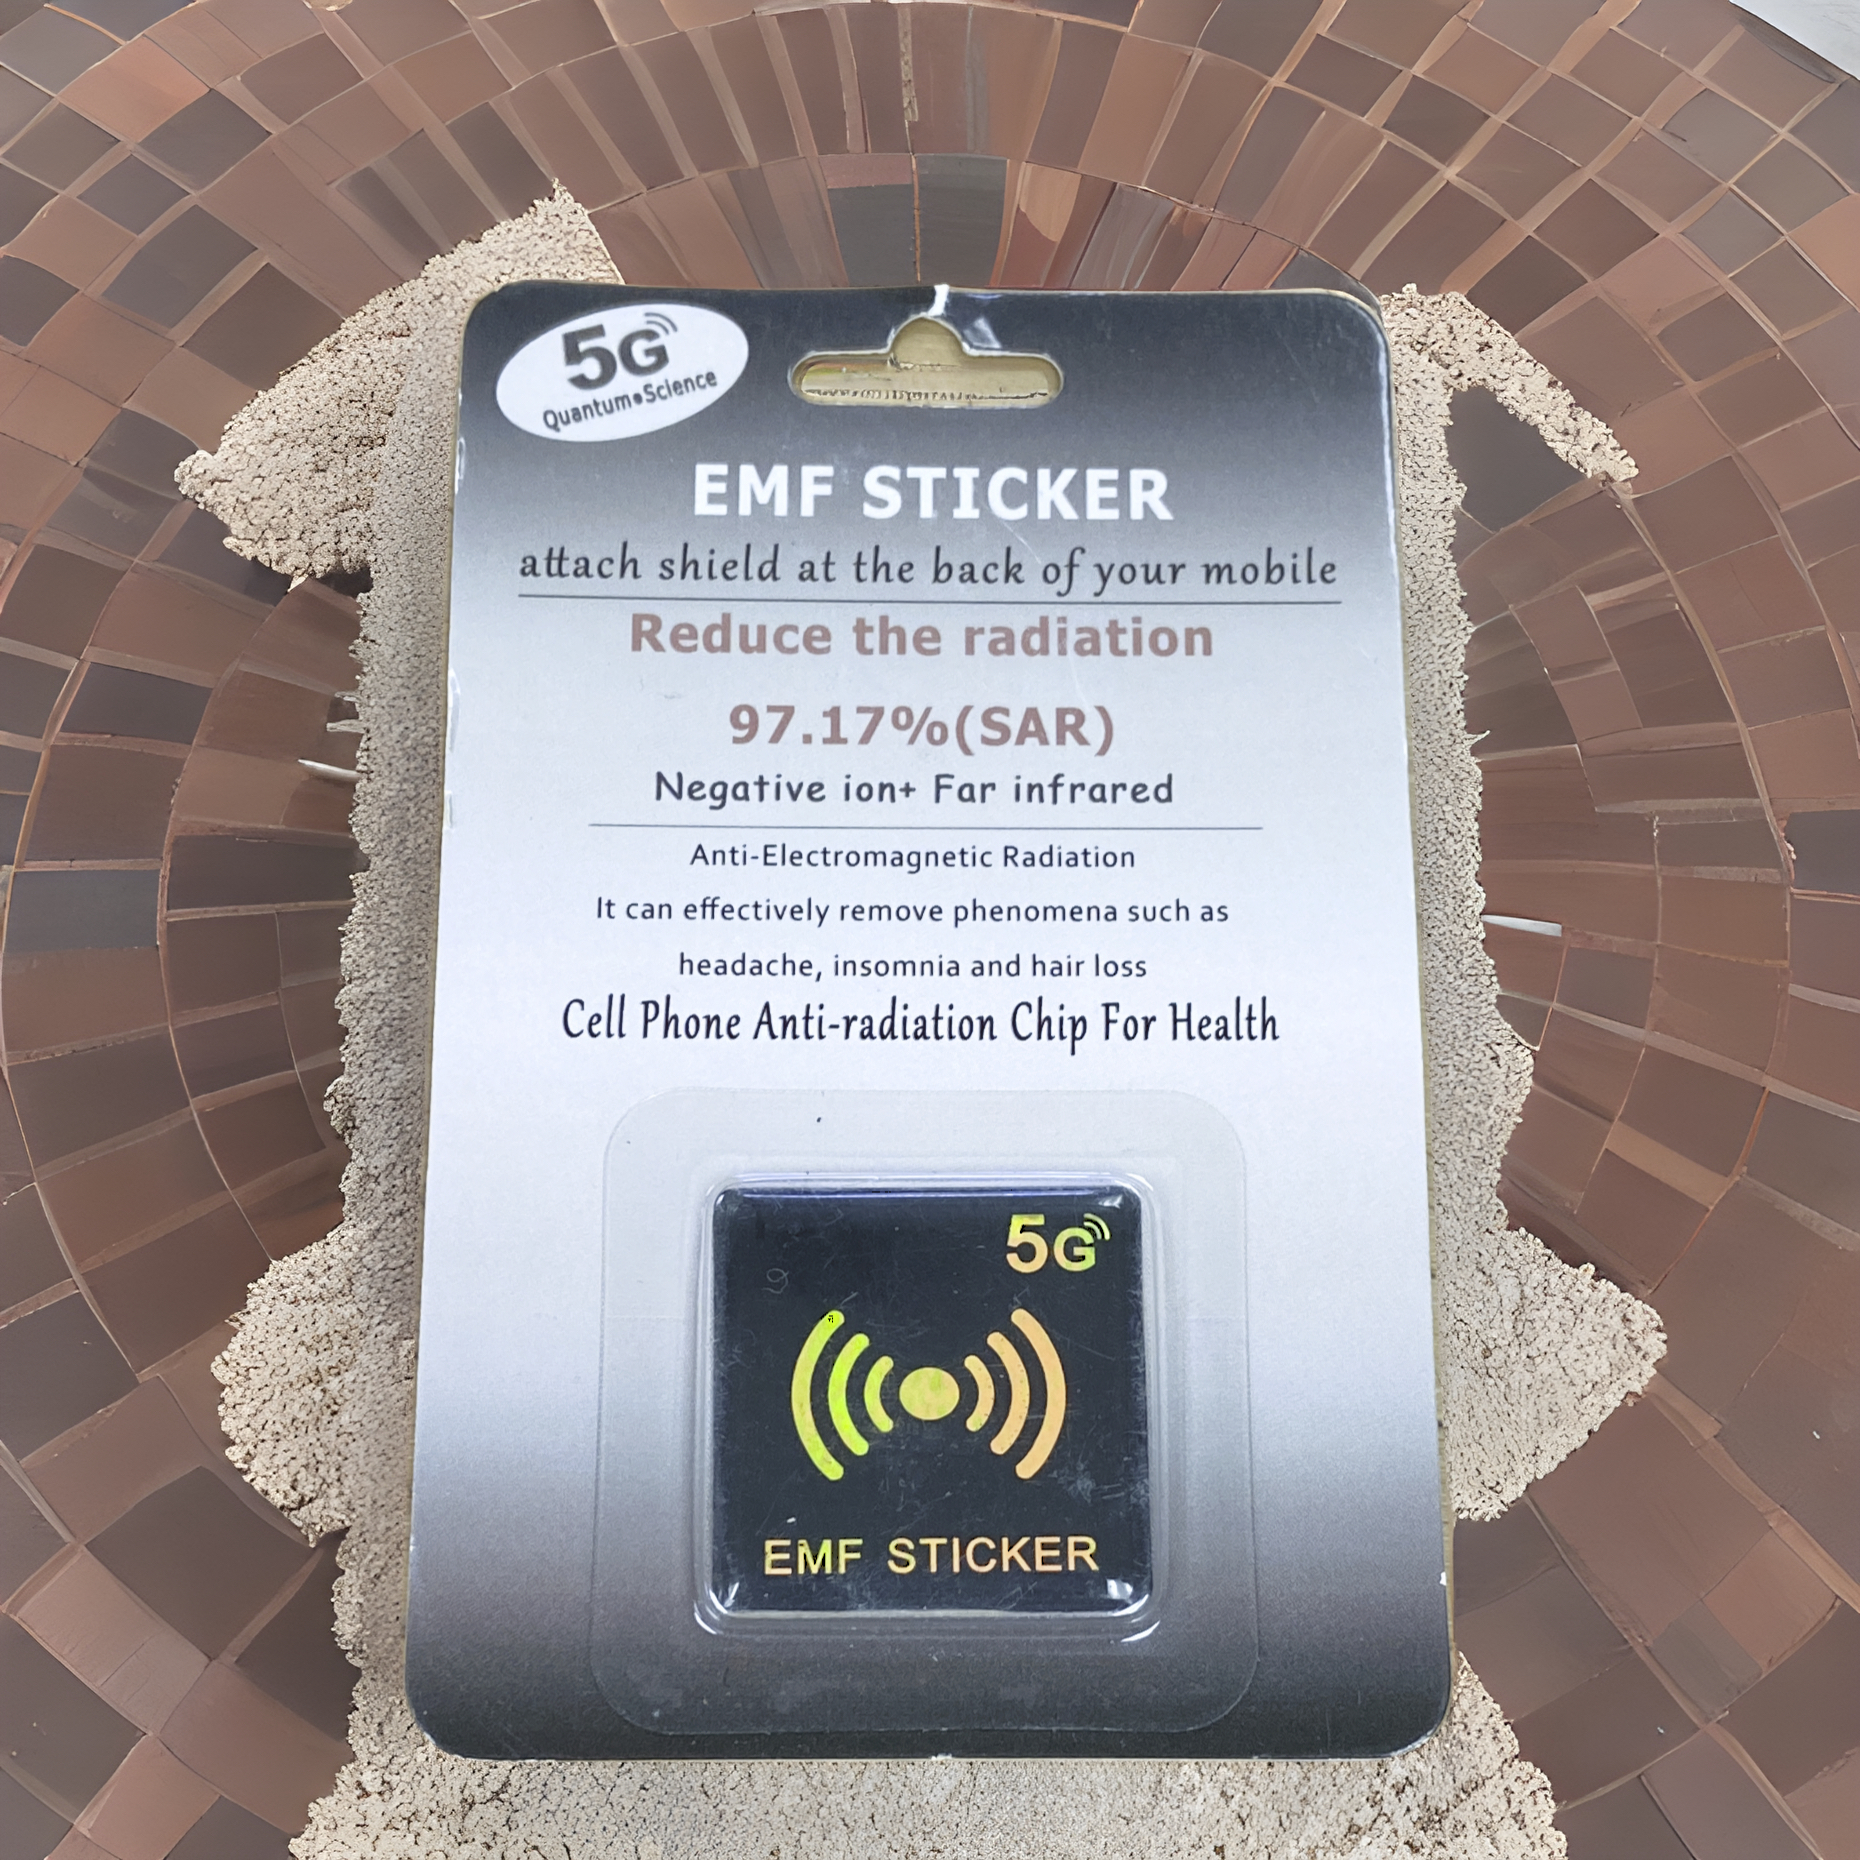 5G Anti EMF Radiation Protection Quantum Shield Mobile Stickers For Camera Cell Phone Laptop Prevent Ionization From EMF Fusion